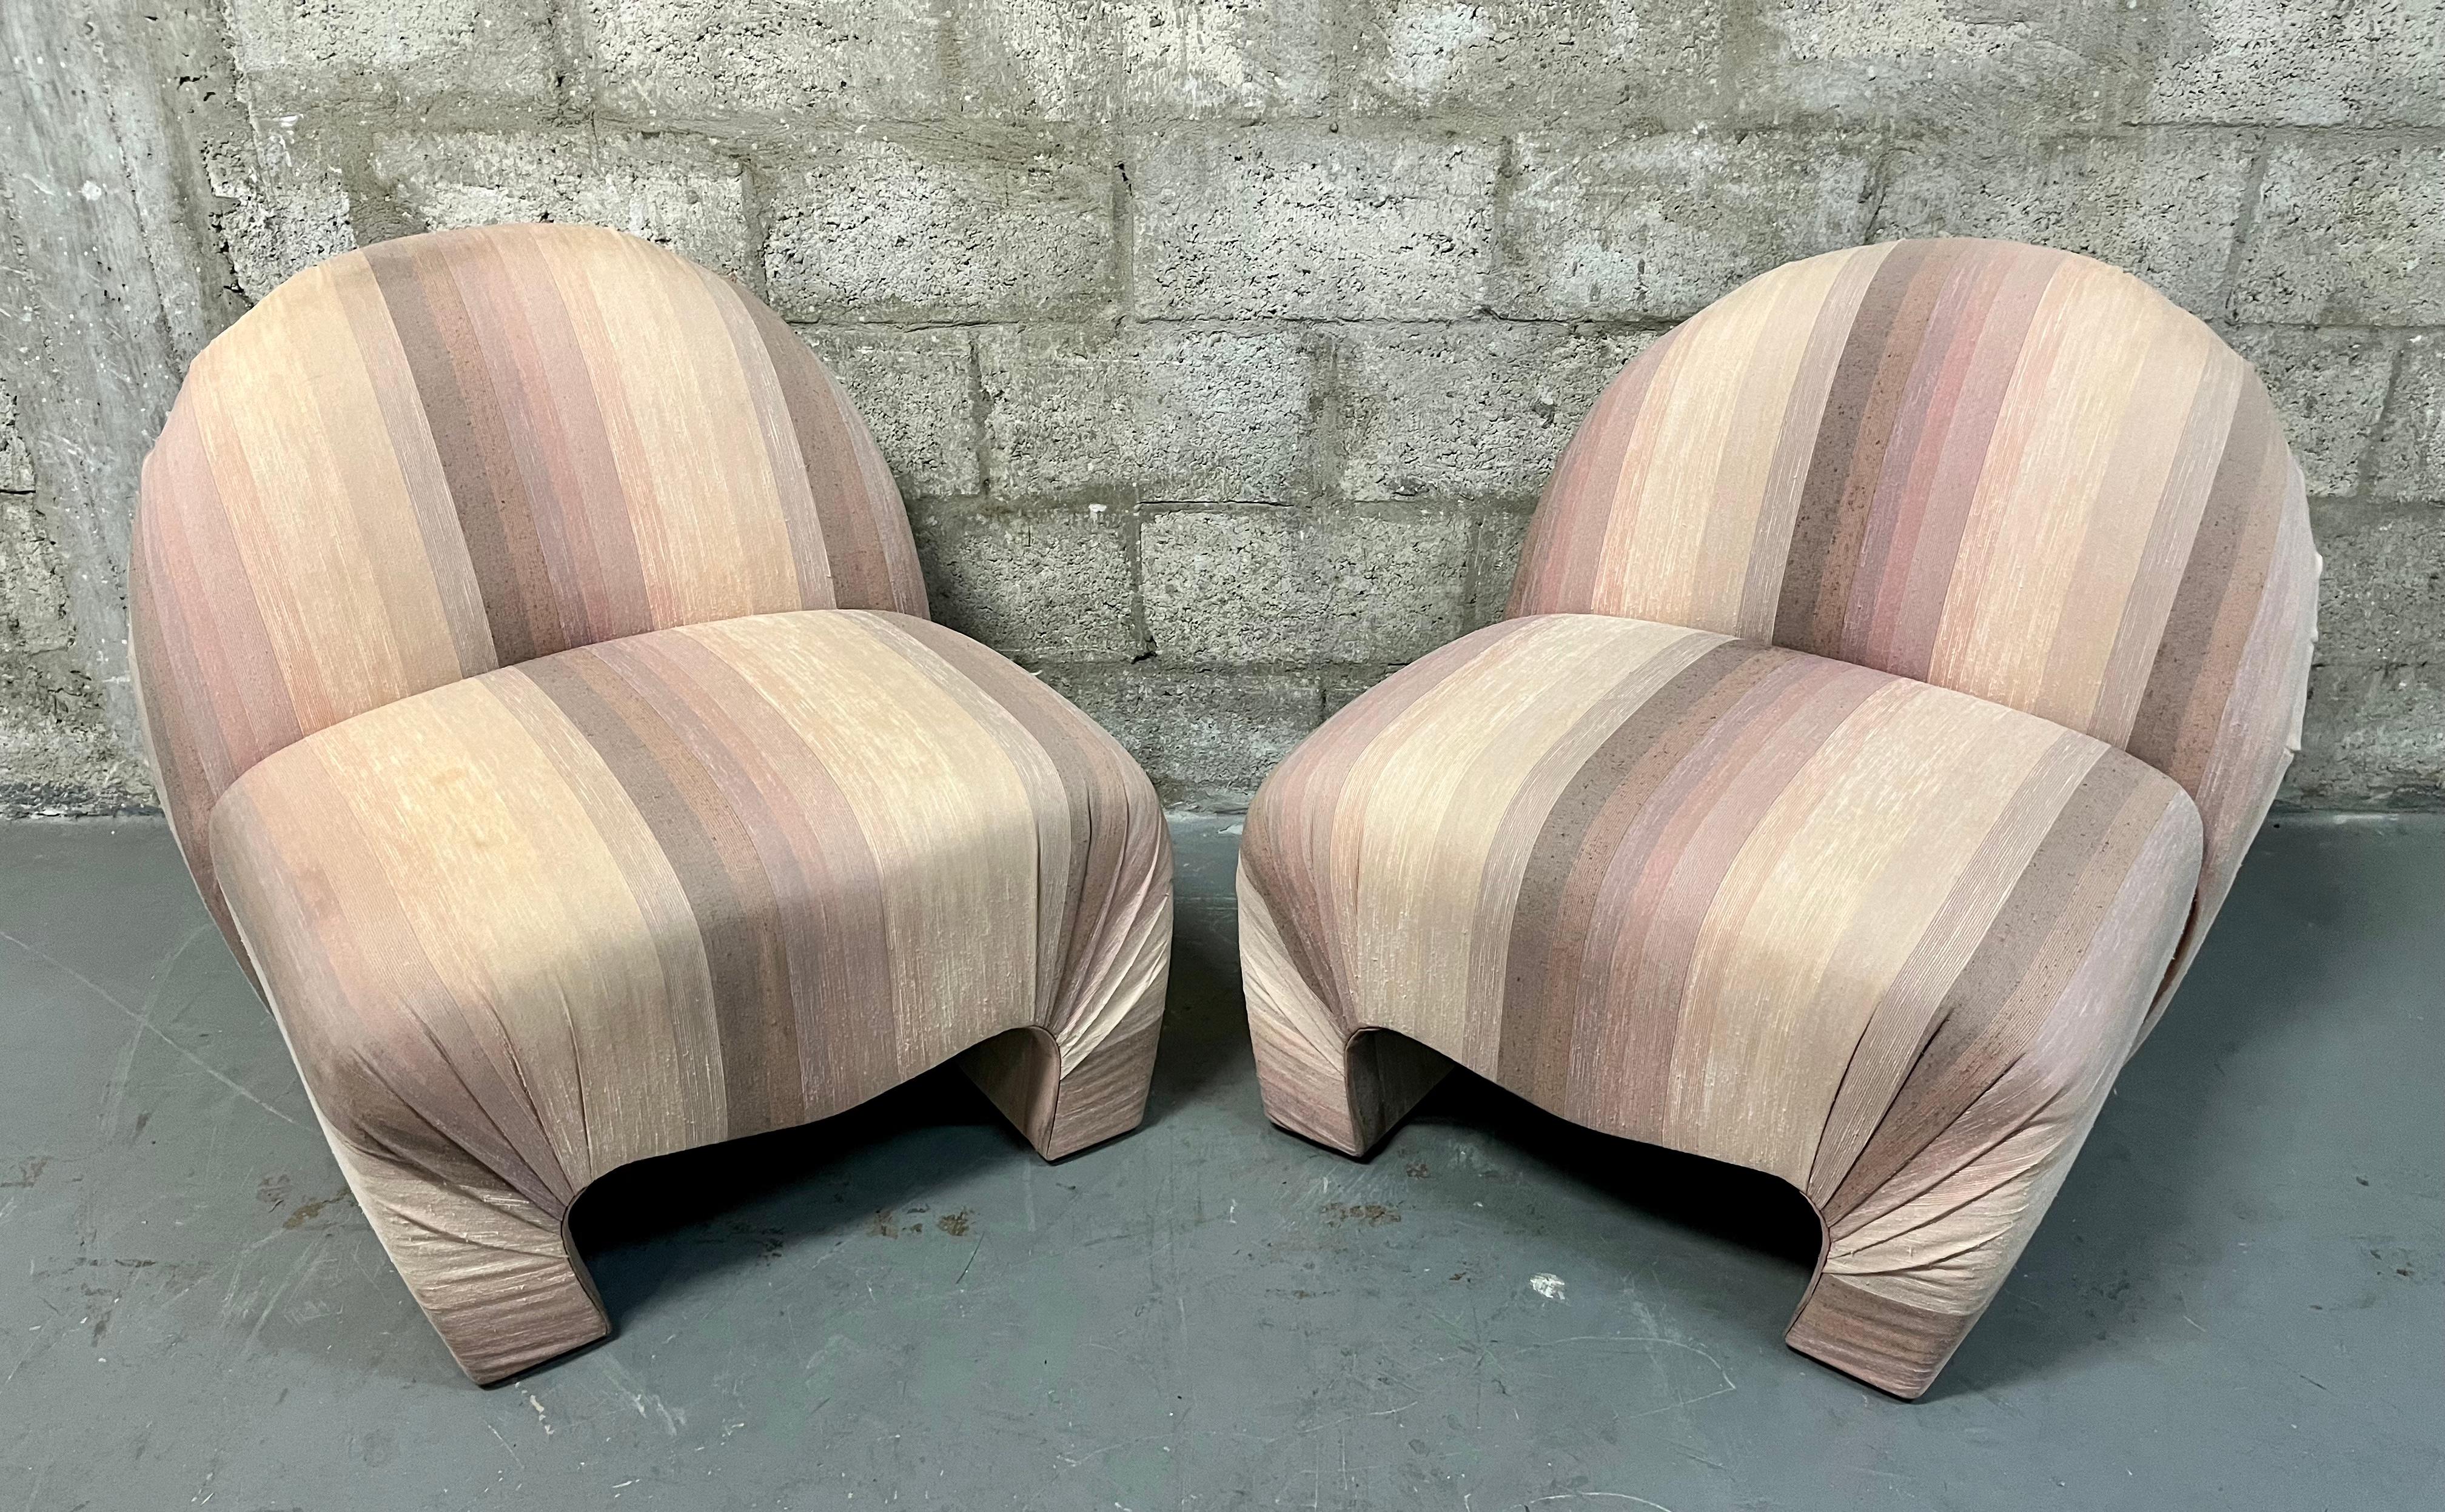 American A Pair of Lounge Chairs in the Vladimir Kagan for Weiman Style. Circa 1980s